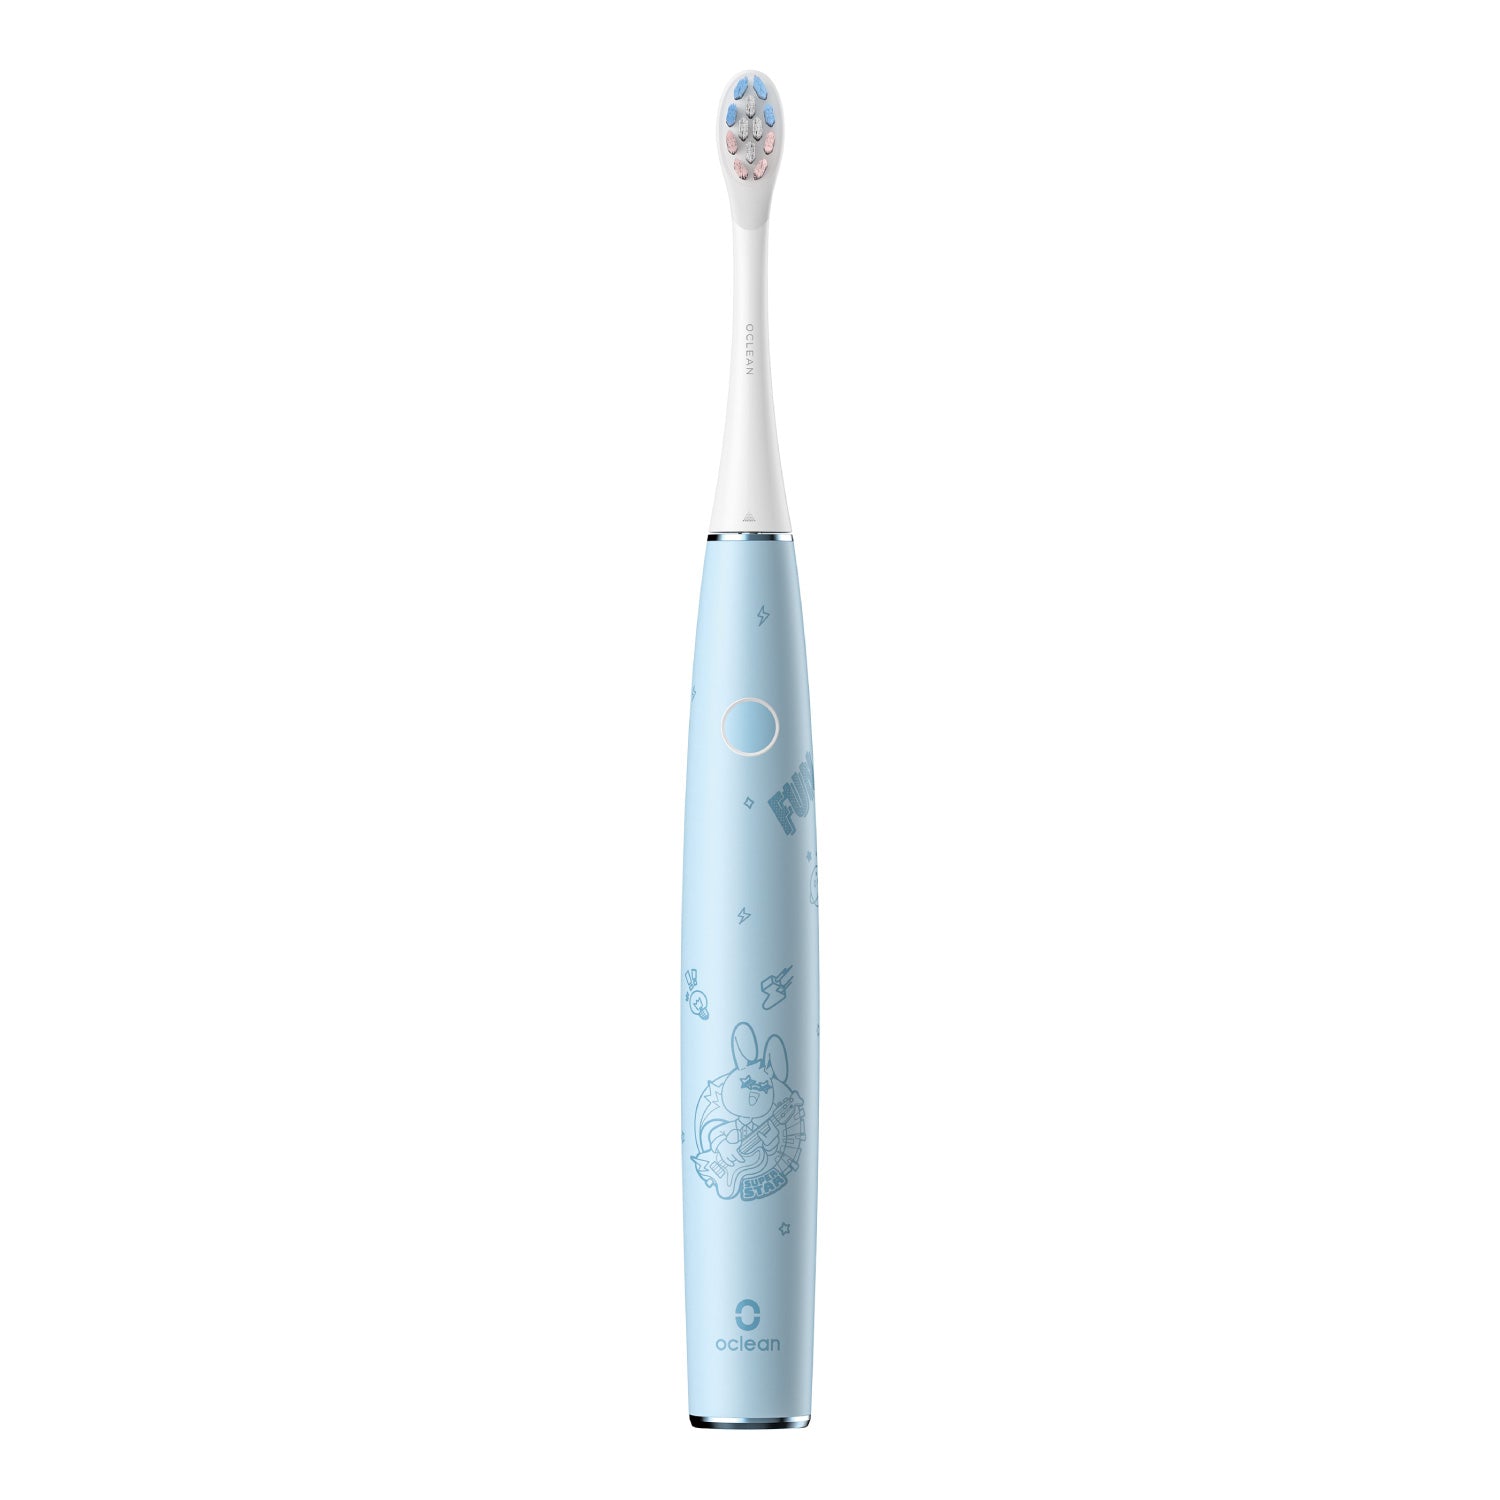 Oclean Kids Electric Toothbrush Toothbrushes Blue  Oclean Official 